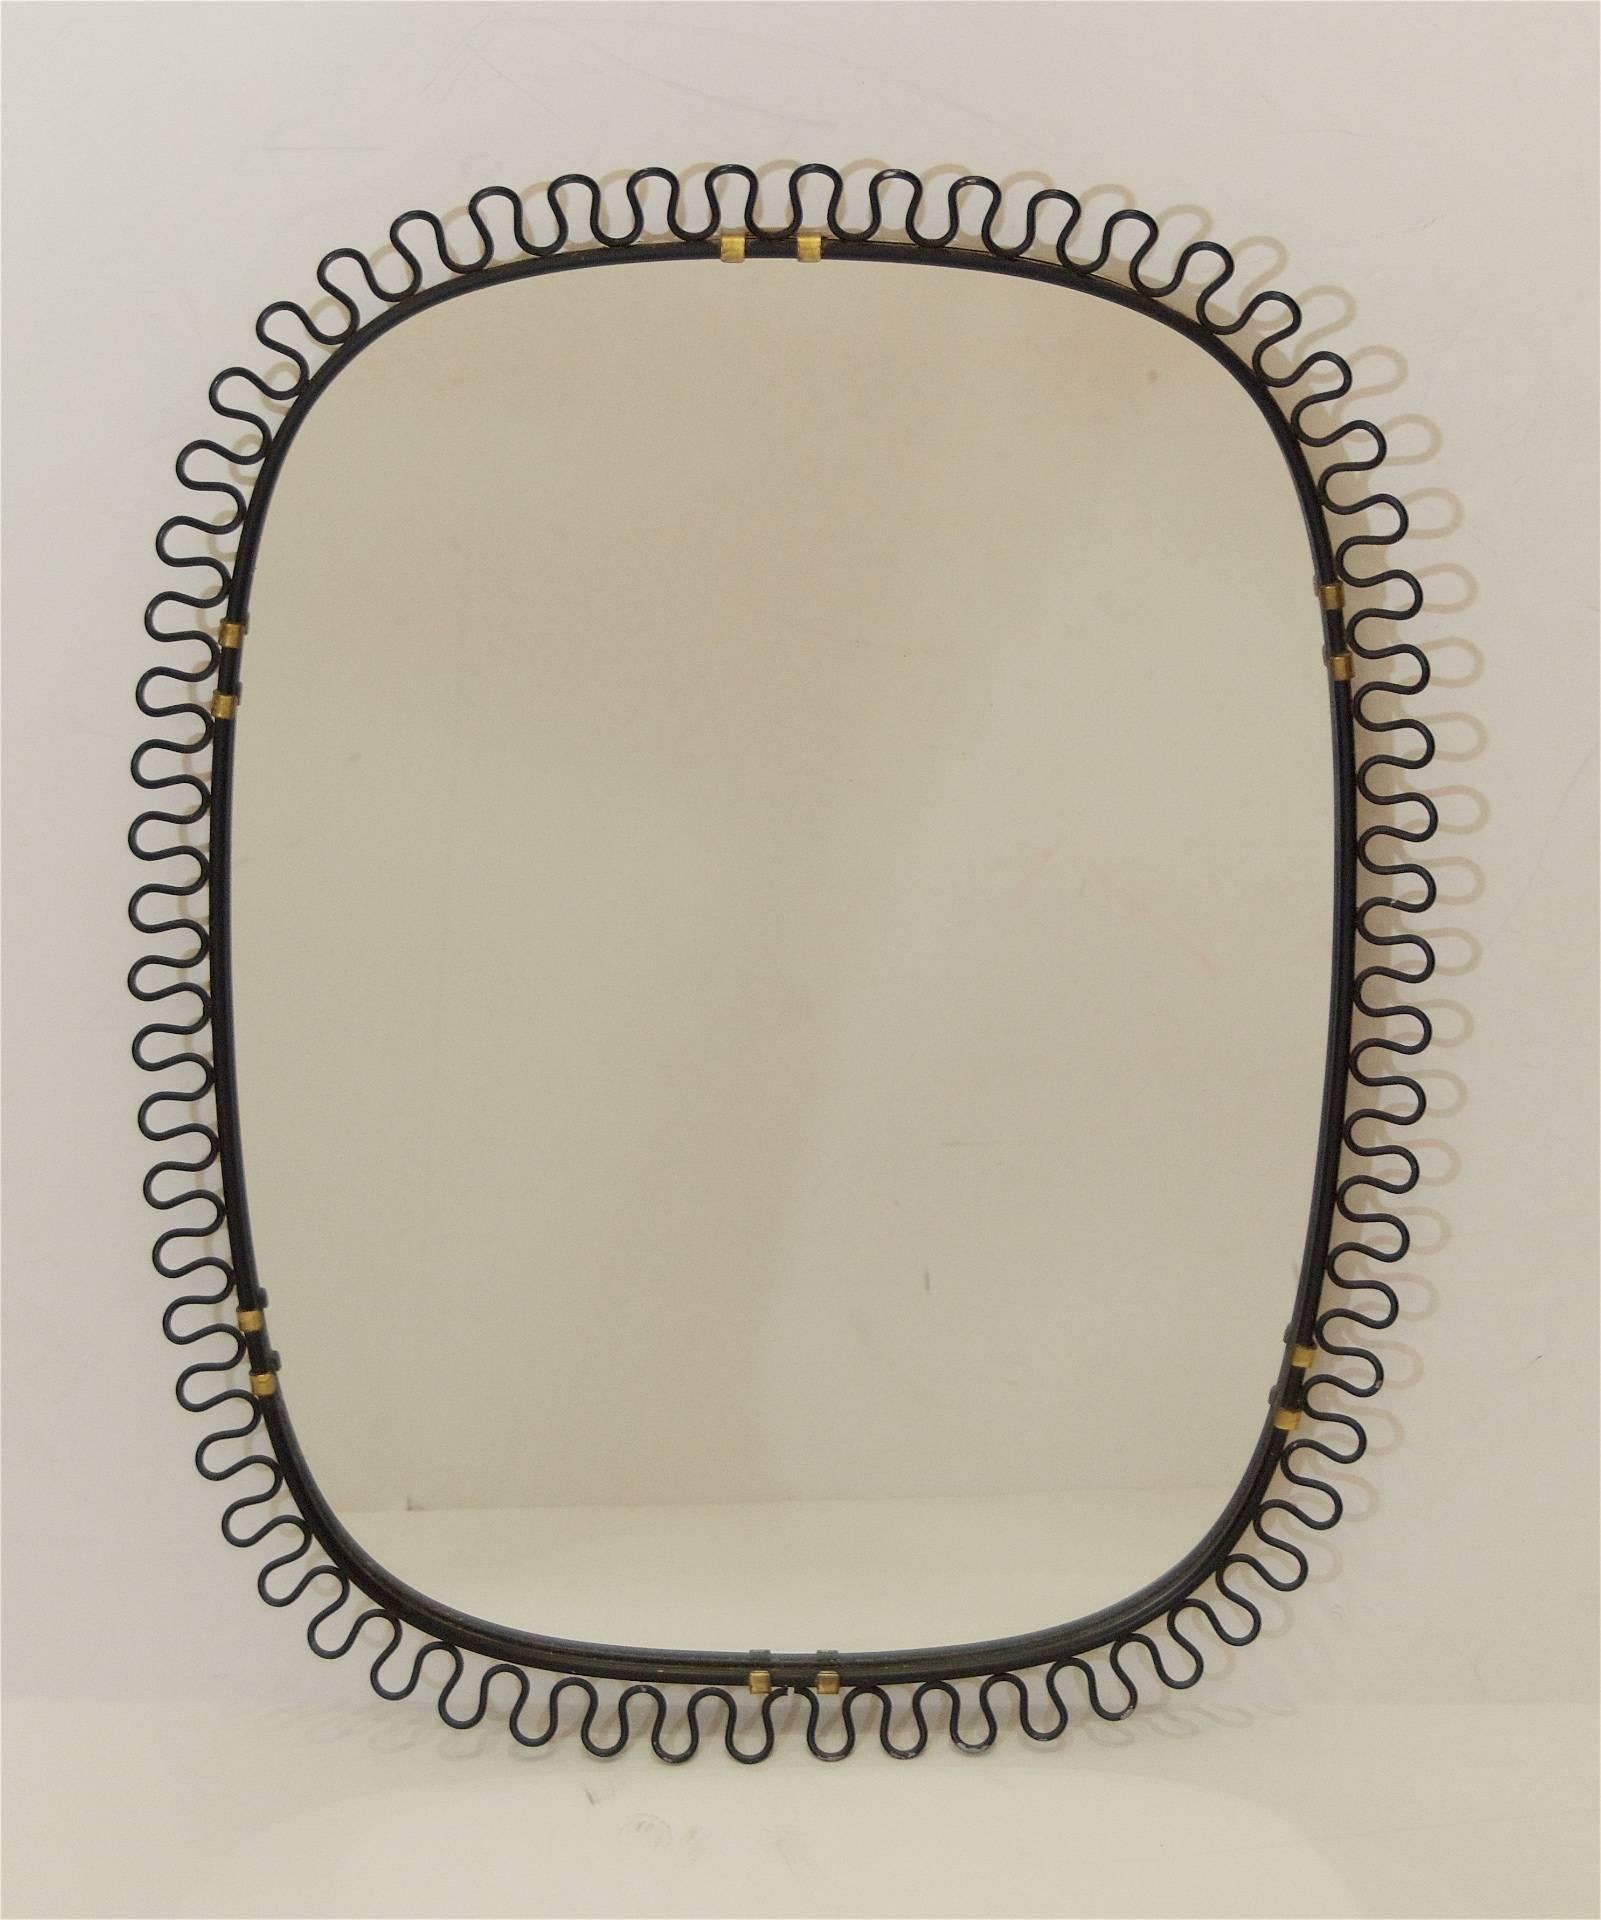 Well-shaped mirror in the style of Josef Frank, the black enameled frame with brass accents. Could also be used as a tray or plateau.